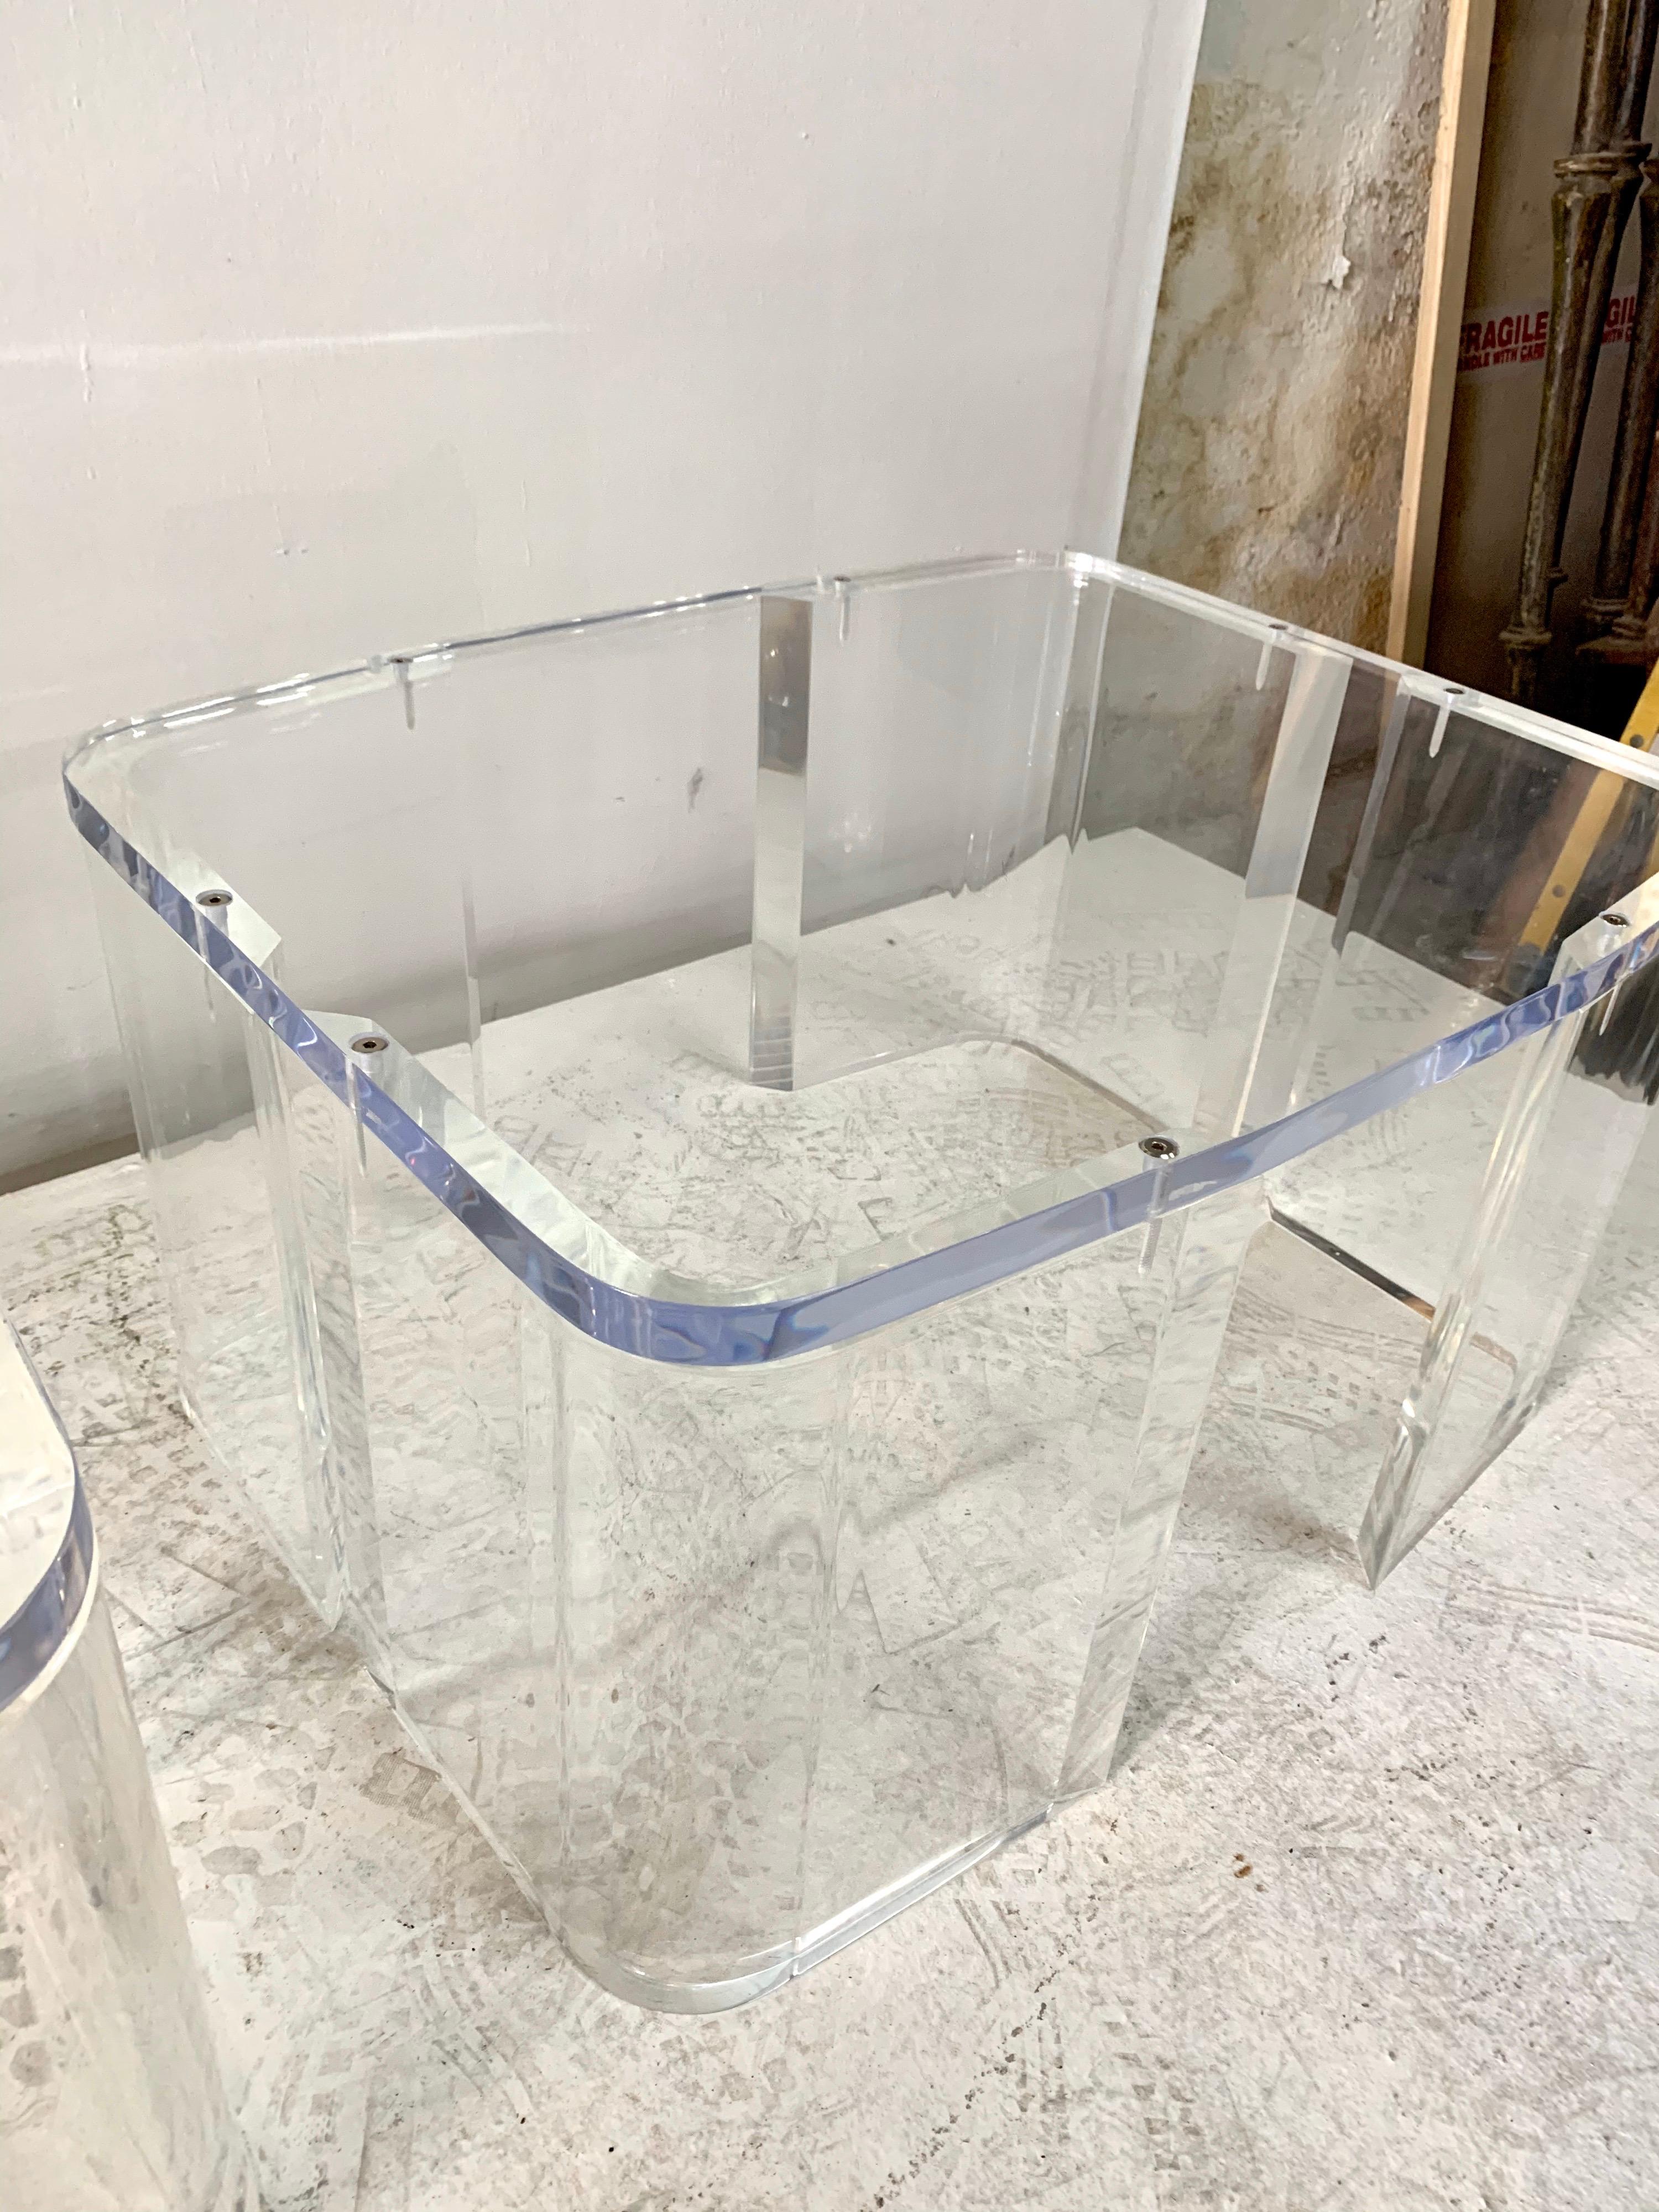 Rounded corners in 3/4 inch thick acrylic/Lucite and similar thick top, these heavy and Industrial style low tables are elegant and transparent. Assembled with visible Industrial screws throughout (used no glue). 

They can be used together or